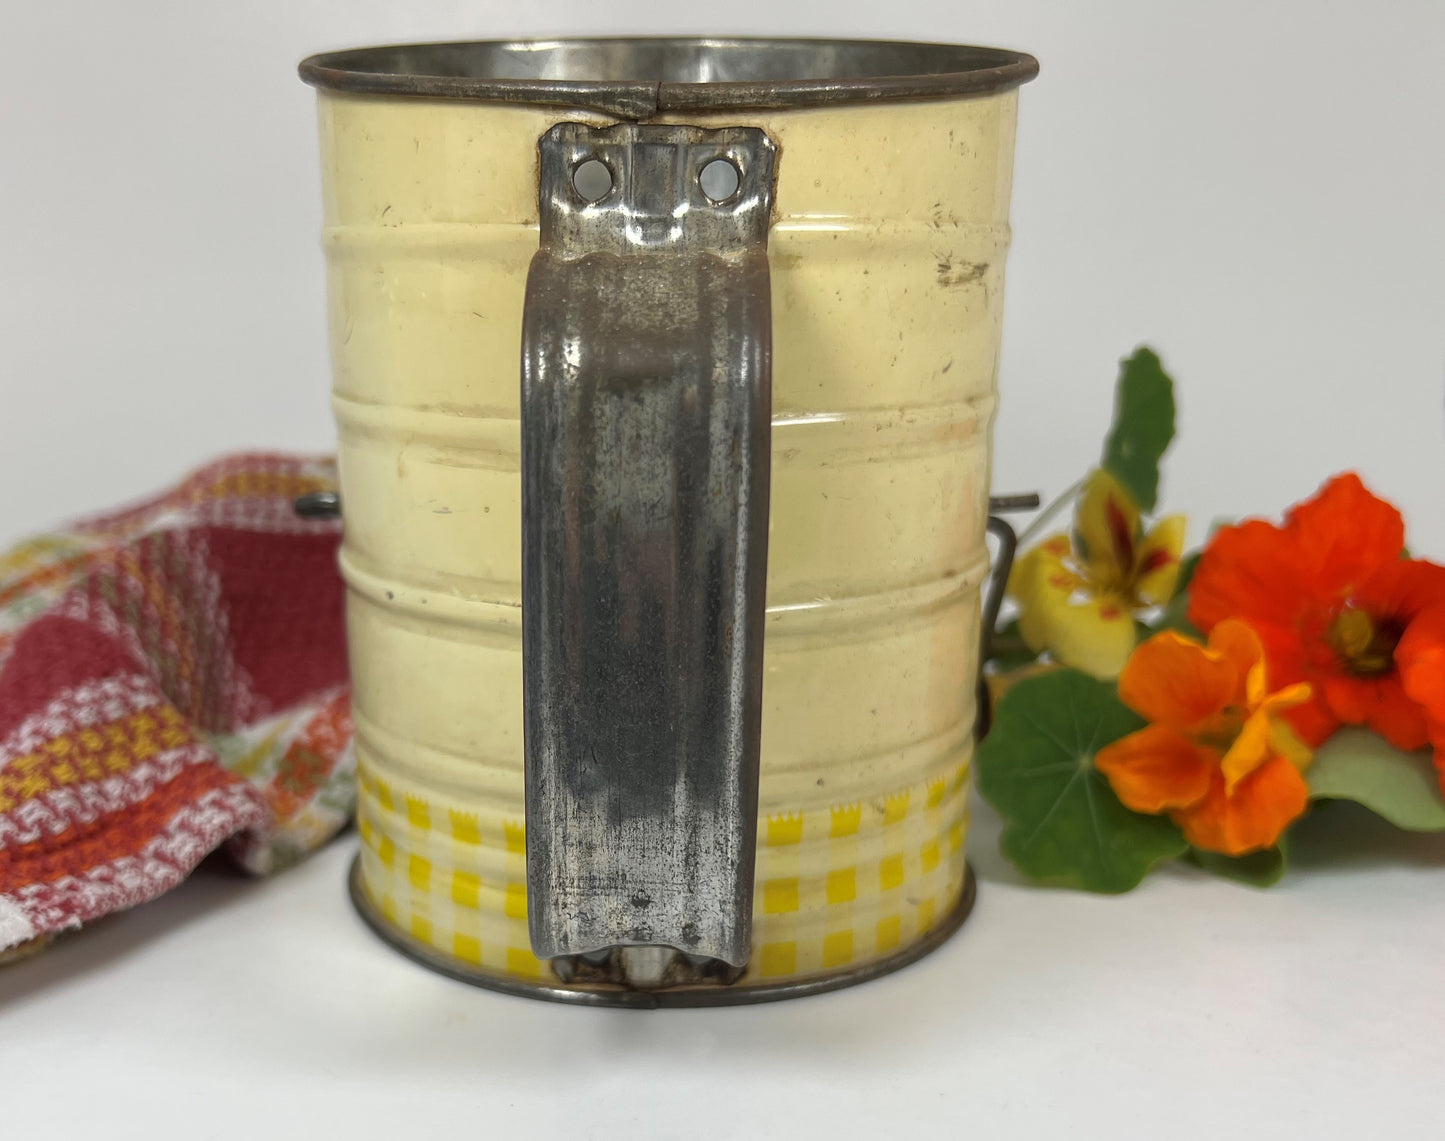 Sifter with Nasturtium Garden Pattern, 1940s Tin Lithographed